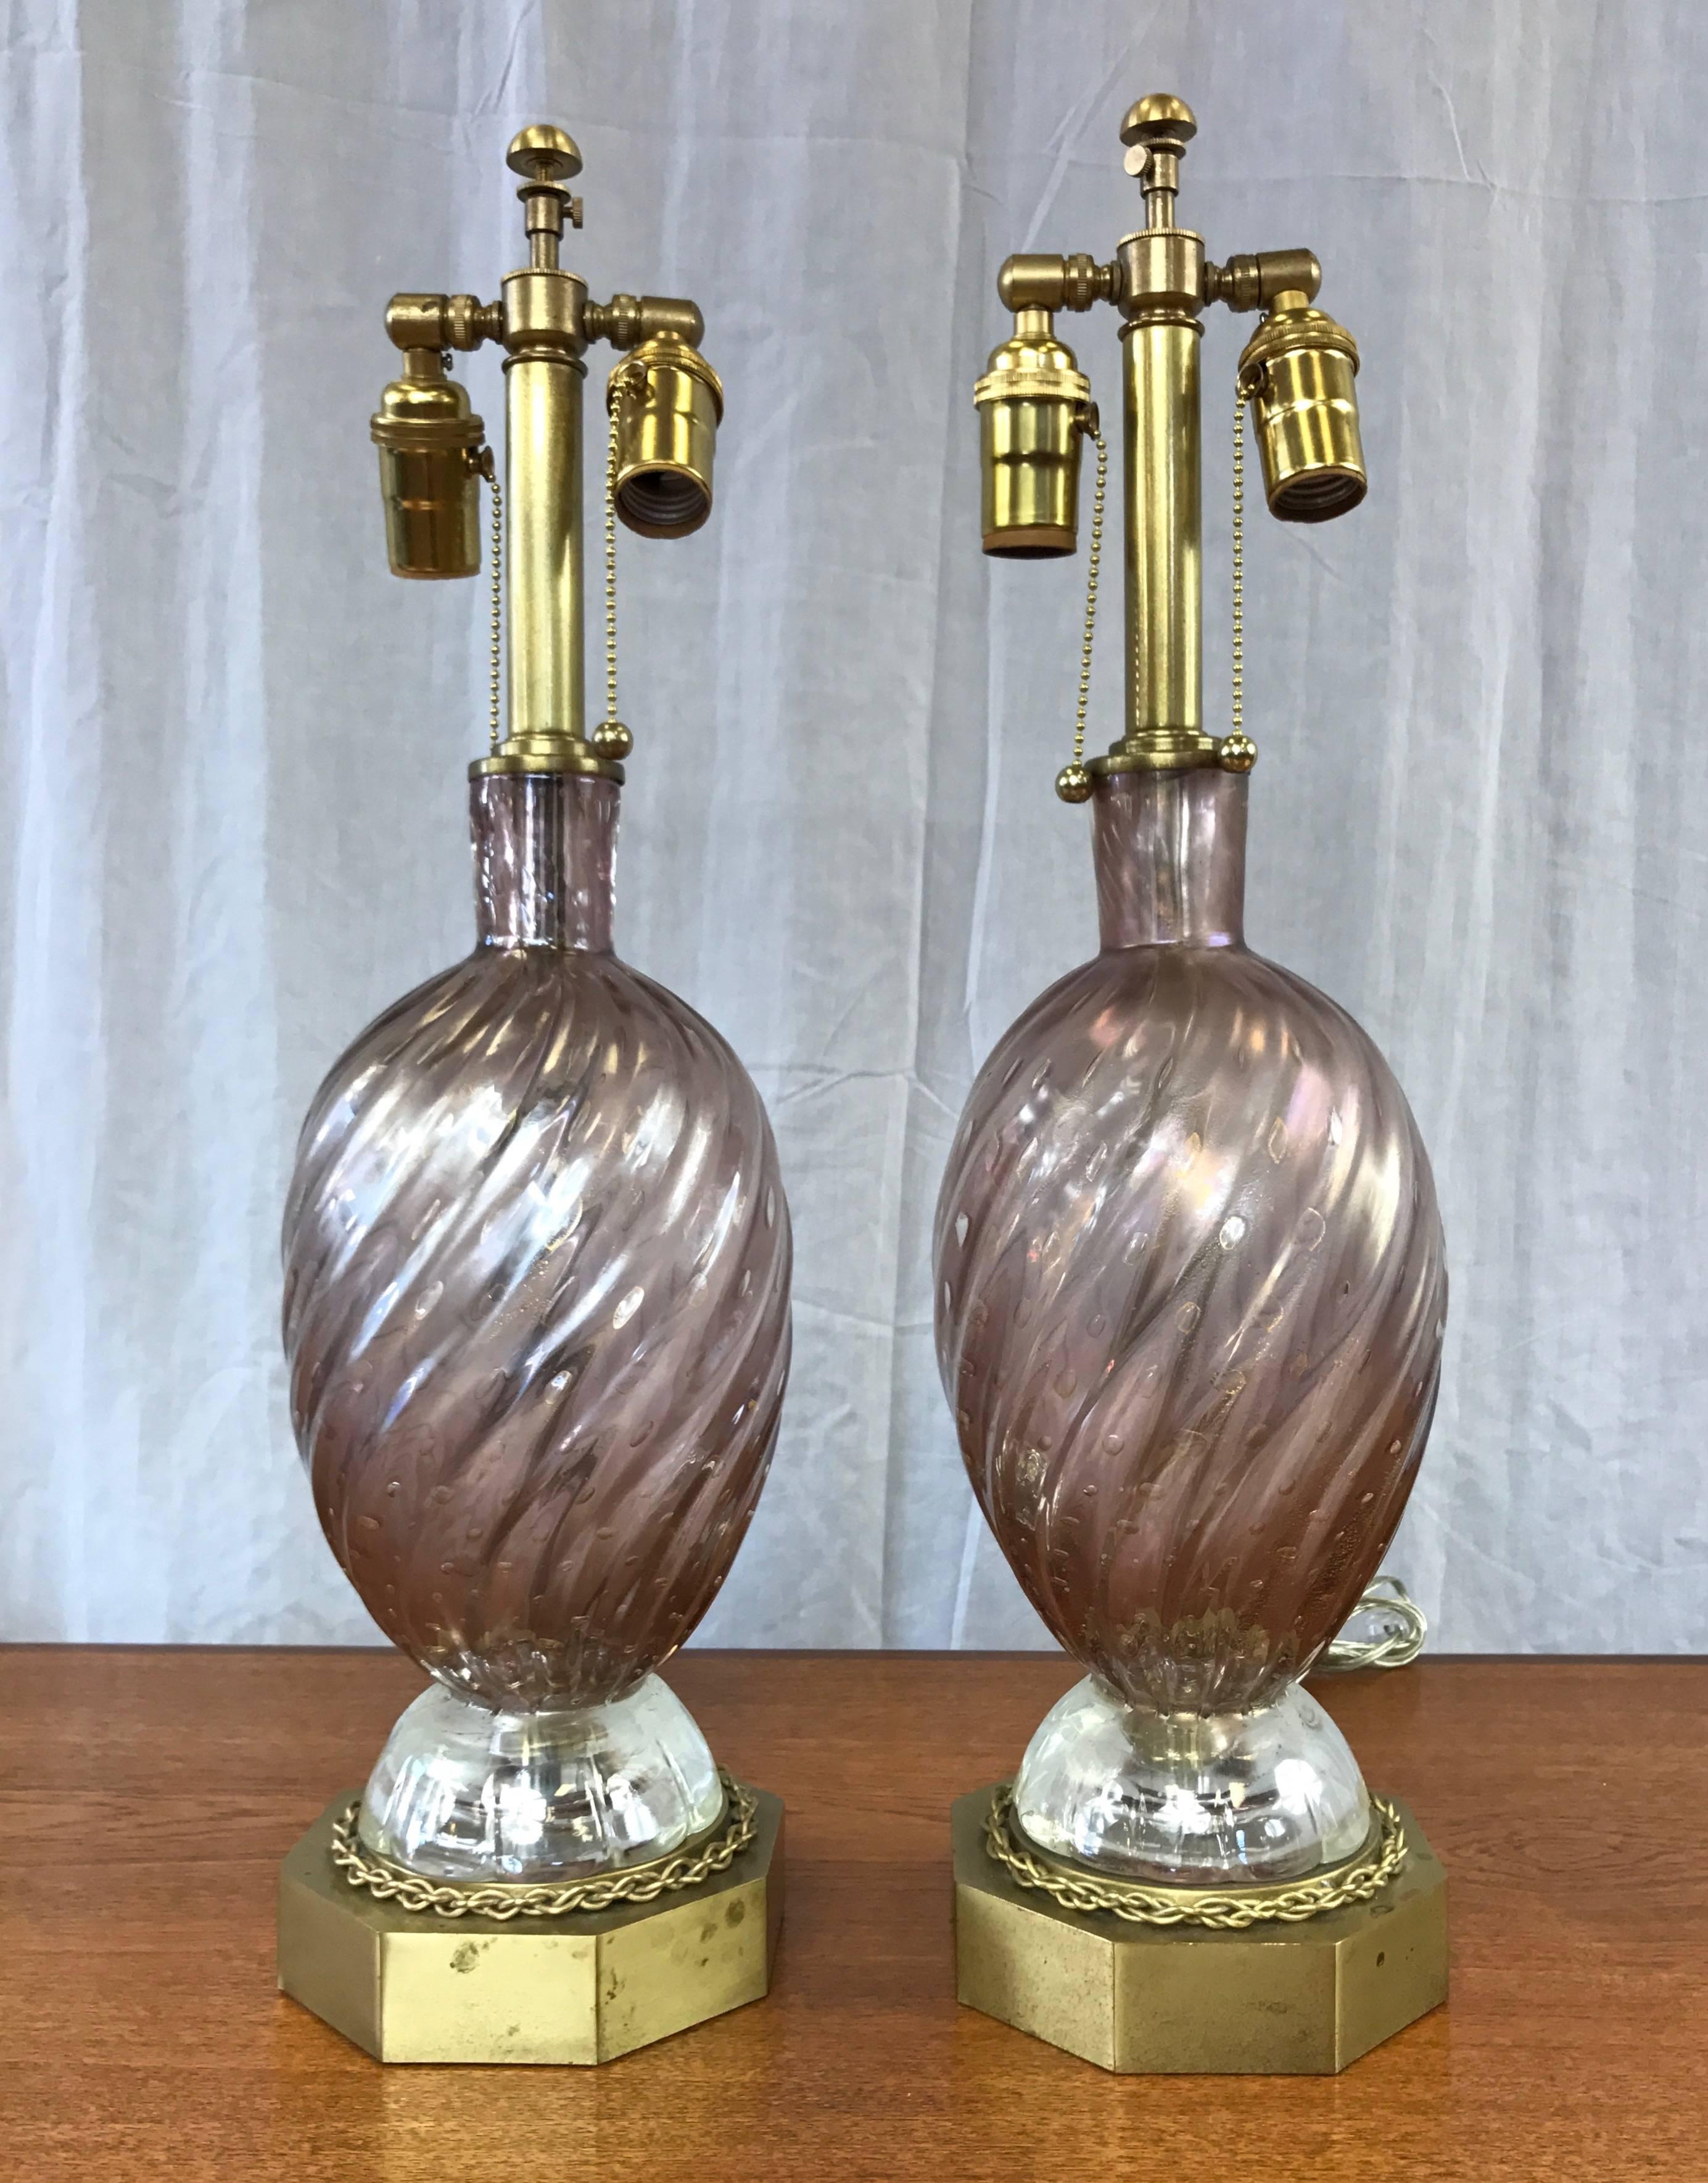 An entrancing pair of vintage Venetian-style glass and brass table lamps by venerable Murano glassworks company Barovier e Toso.

Beautiful handblown bullicante glass body is pale amethyst with dusty rose undertones. It’s enhanced by a shimmering